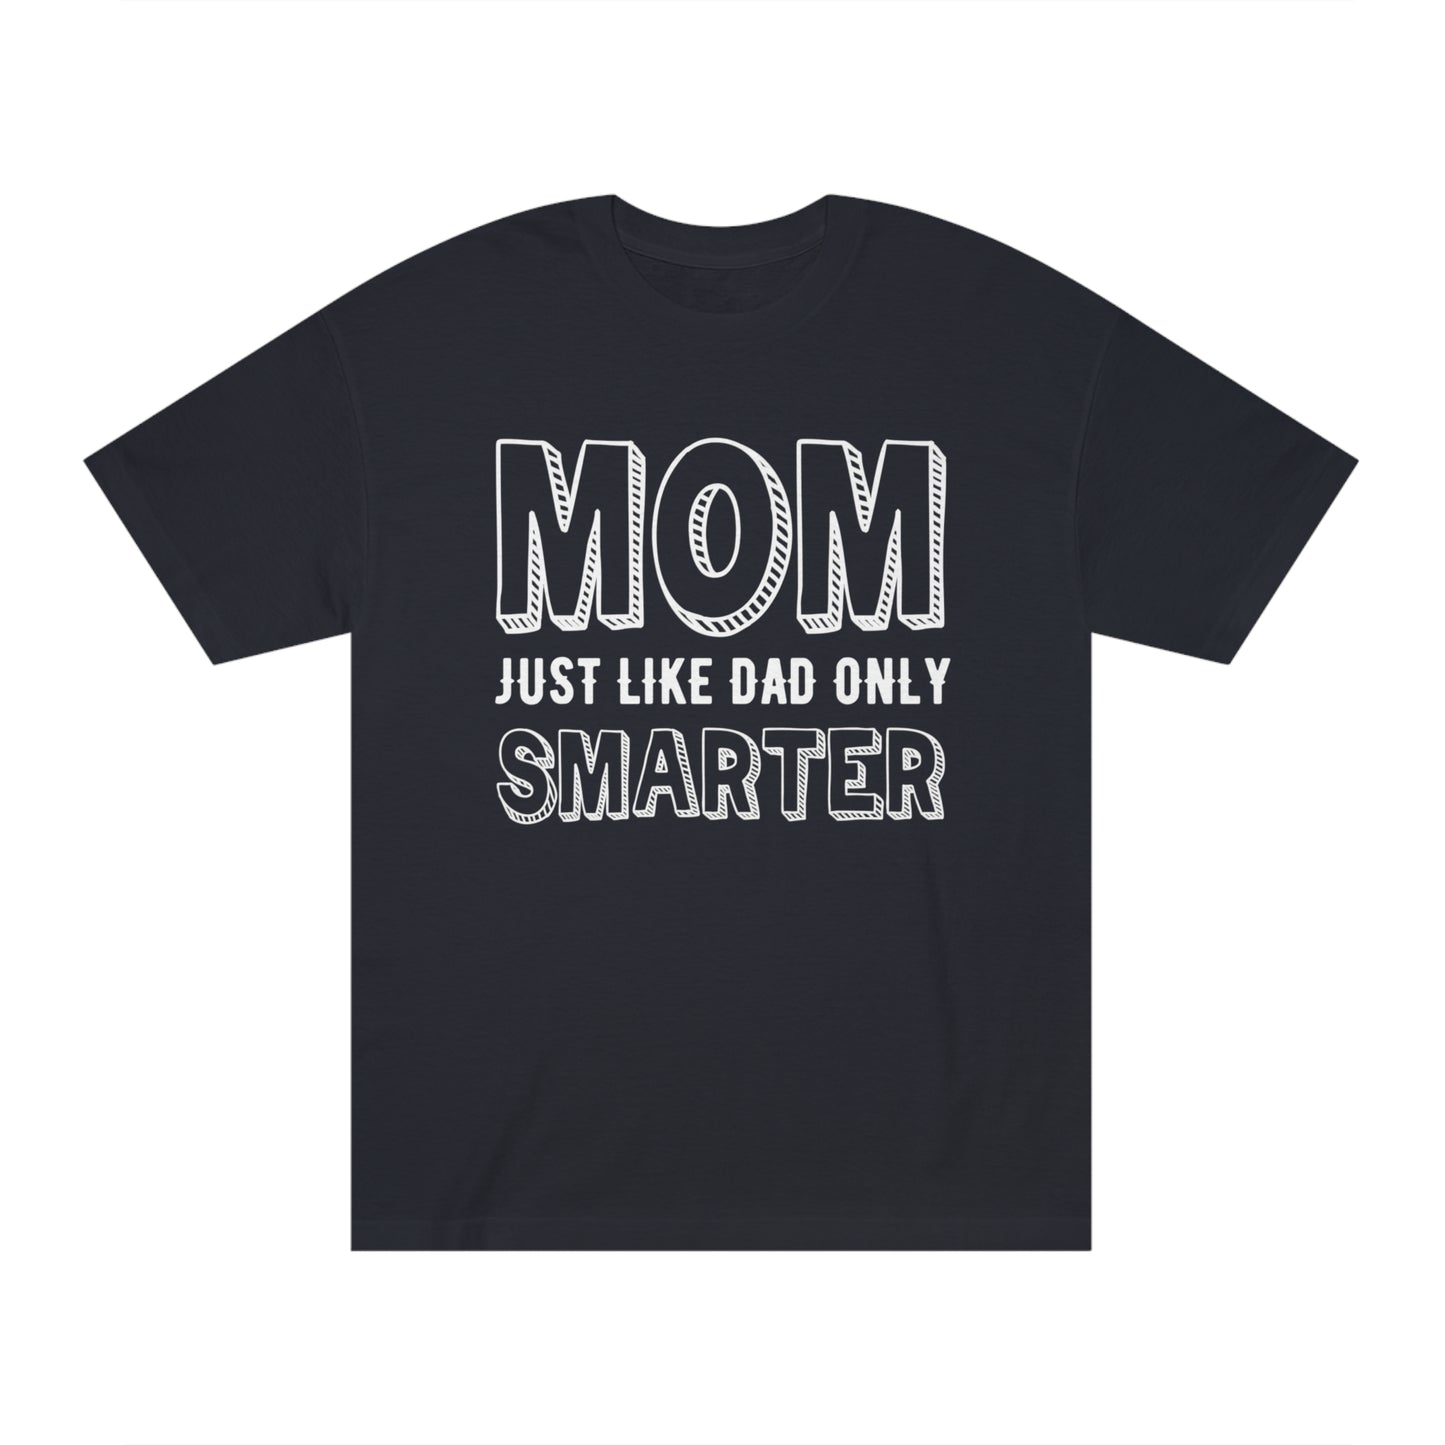 Mom just like dad only smarter Unisex Classic Tee